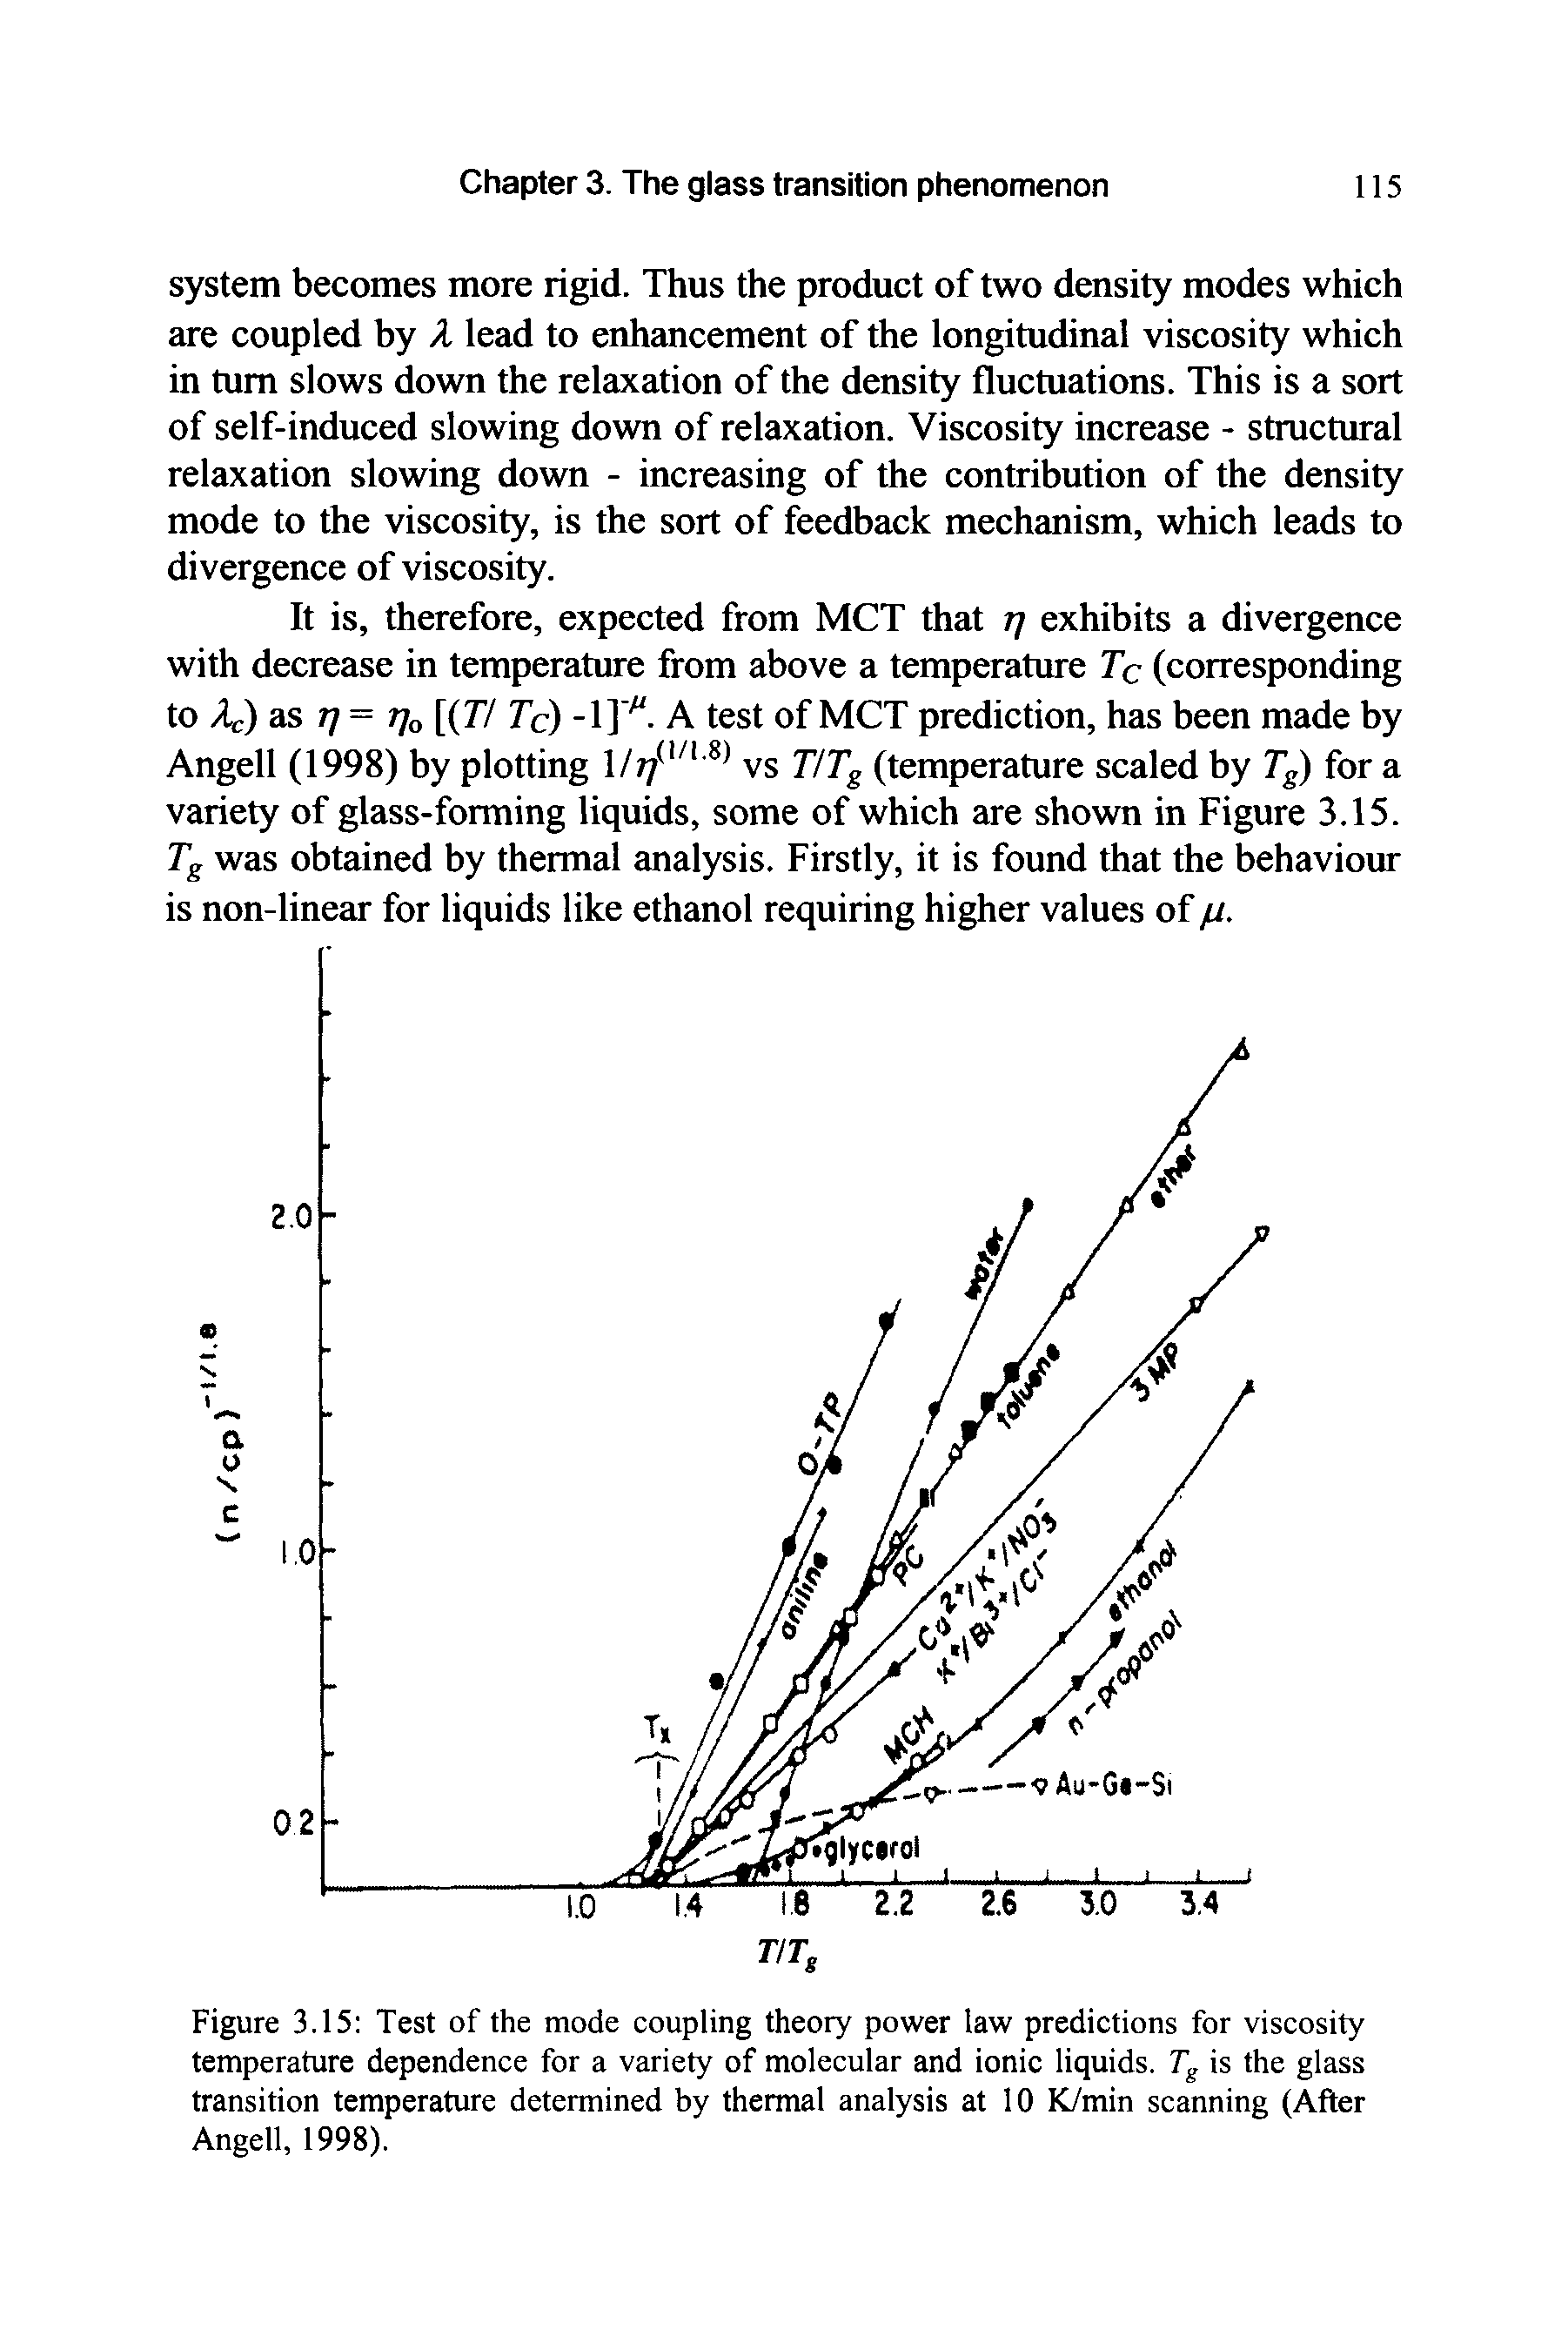 Figure 3.15 Test of the mode coupling theory power law predictions for viscosity temperature dependence for a variety of molecular and ionic liquids. Tg is the glass transition temperature determined by thermal analysis at 10 K/min scanning (After Angell, 1998).